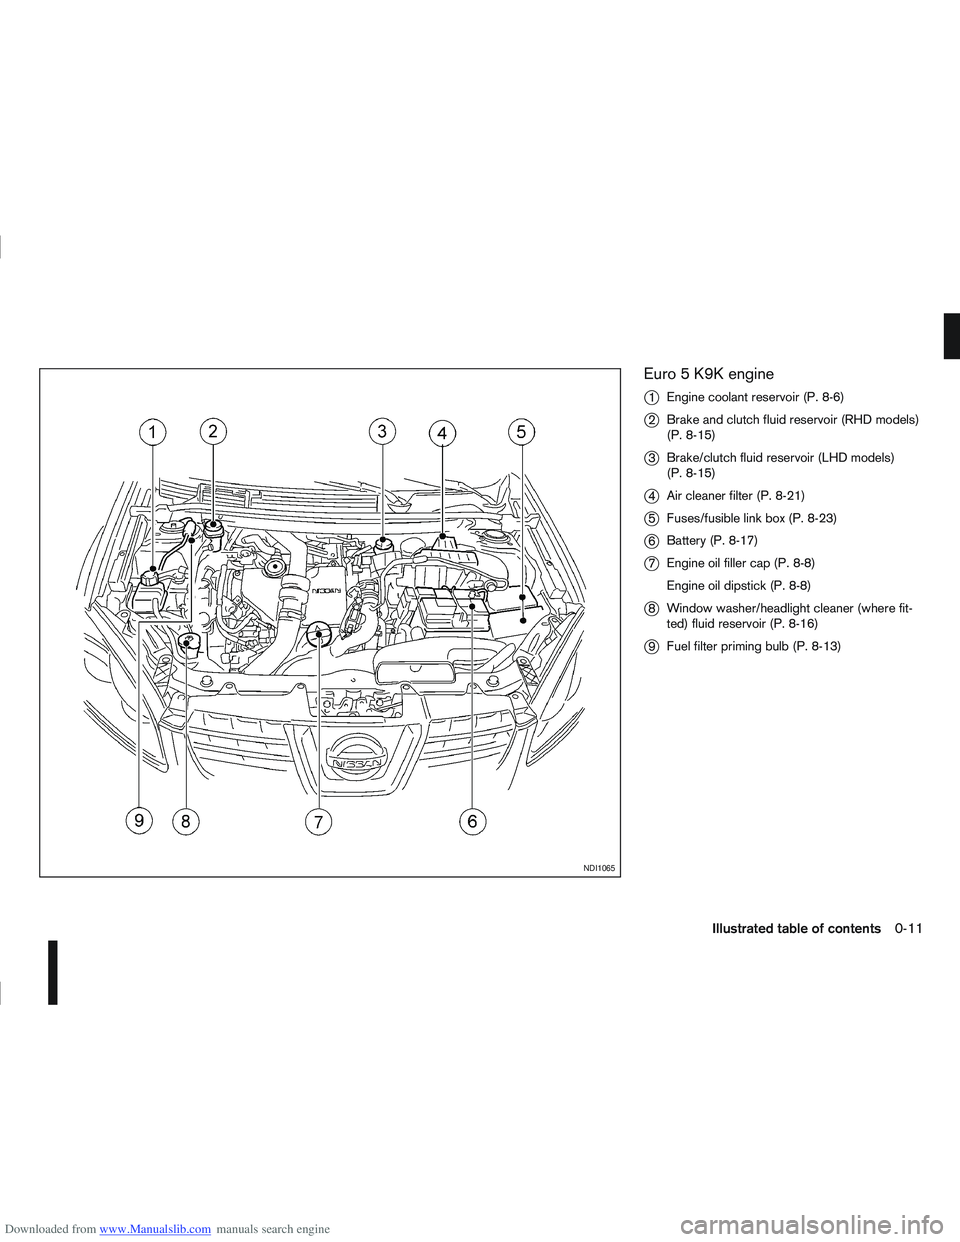 NISSAN QASHQAI 2012  Owners Manual Downloaded from www.Manualslib.com manuals search engine Euro 5 K9K engine
j
1Engine coolant reservoir (P. 8-6)
j2Brake and clutch fluid reservoir (RHD models)
(P. 8-15)
j3Brake/clutch fluid reservoir